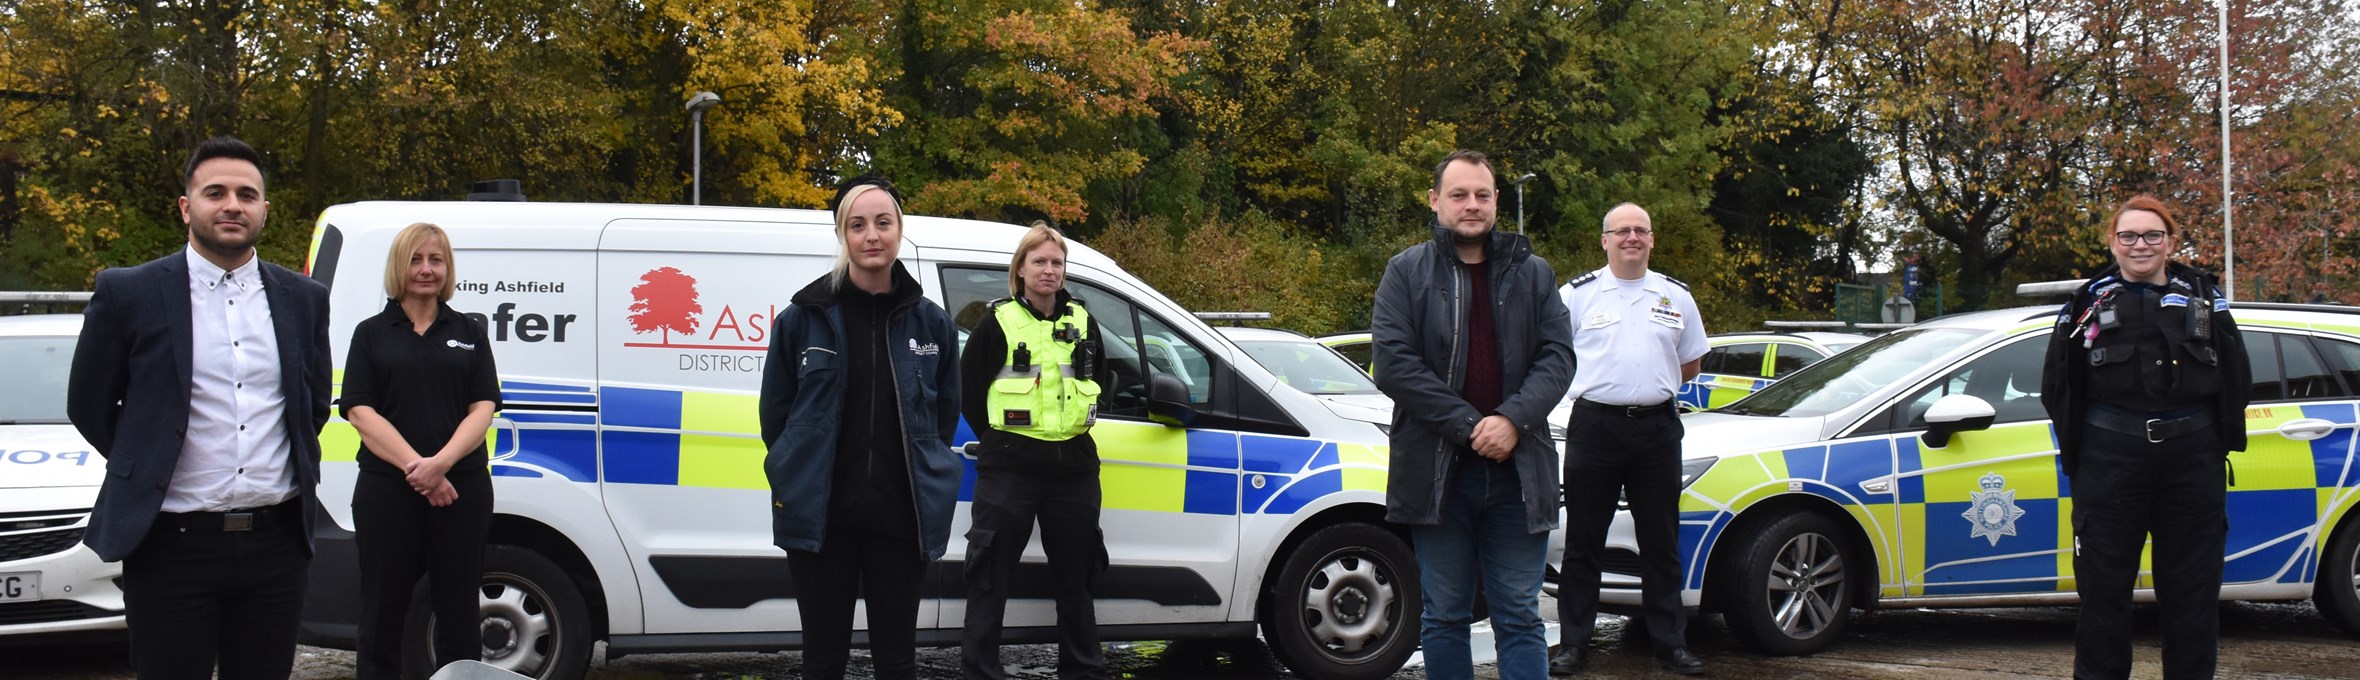 Council officers and a police officer pose in front of a police car outside 